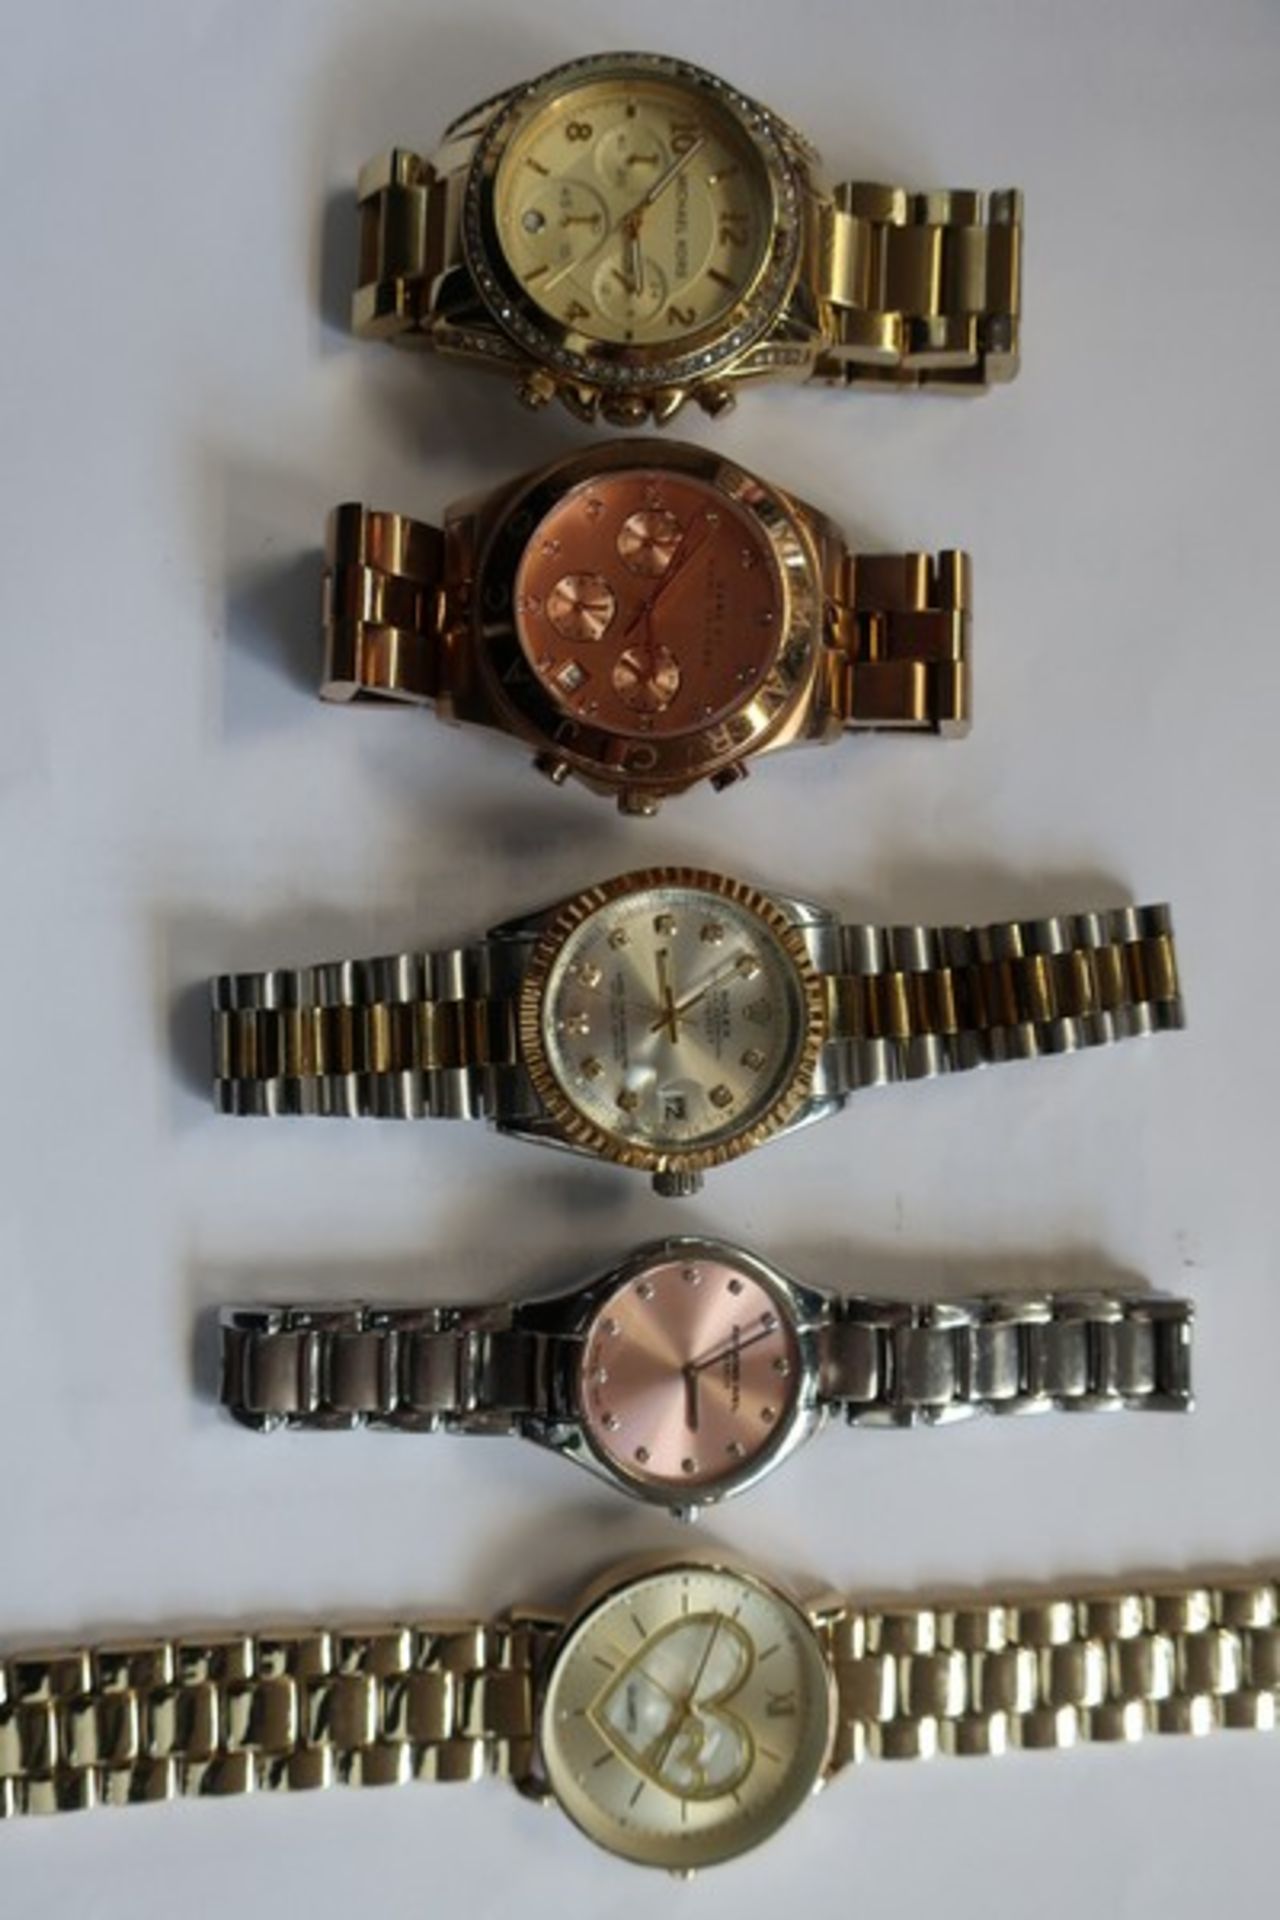 A large collection of high street fashion watches to include Michael Kors, DKNY, Armani etc. - Image 5 of 5